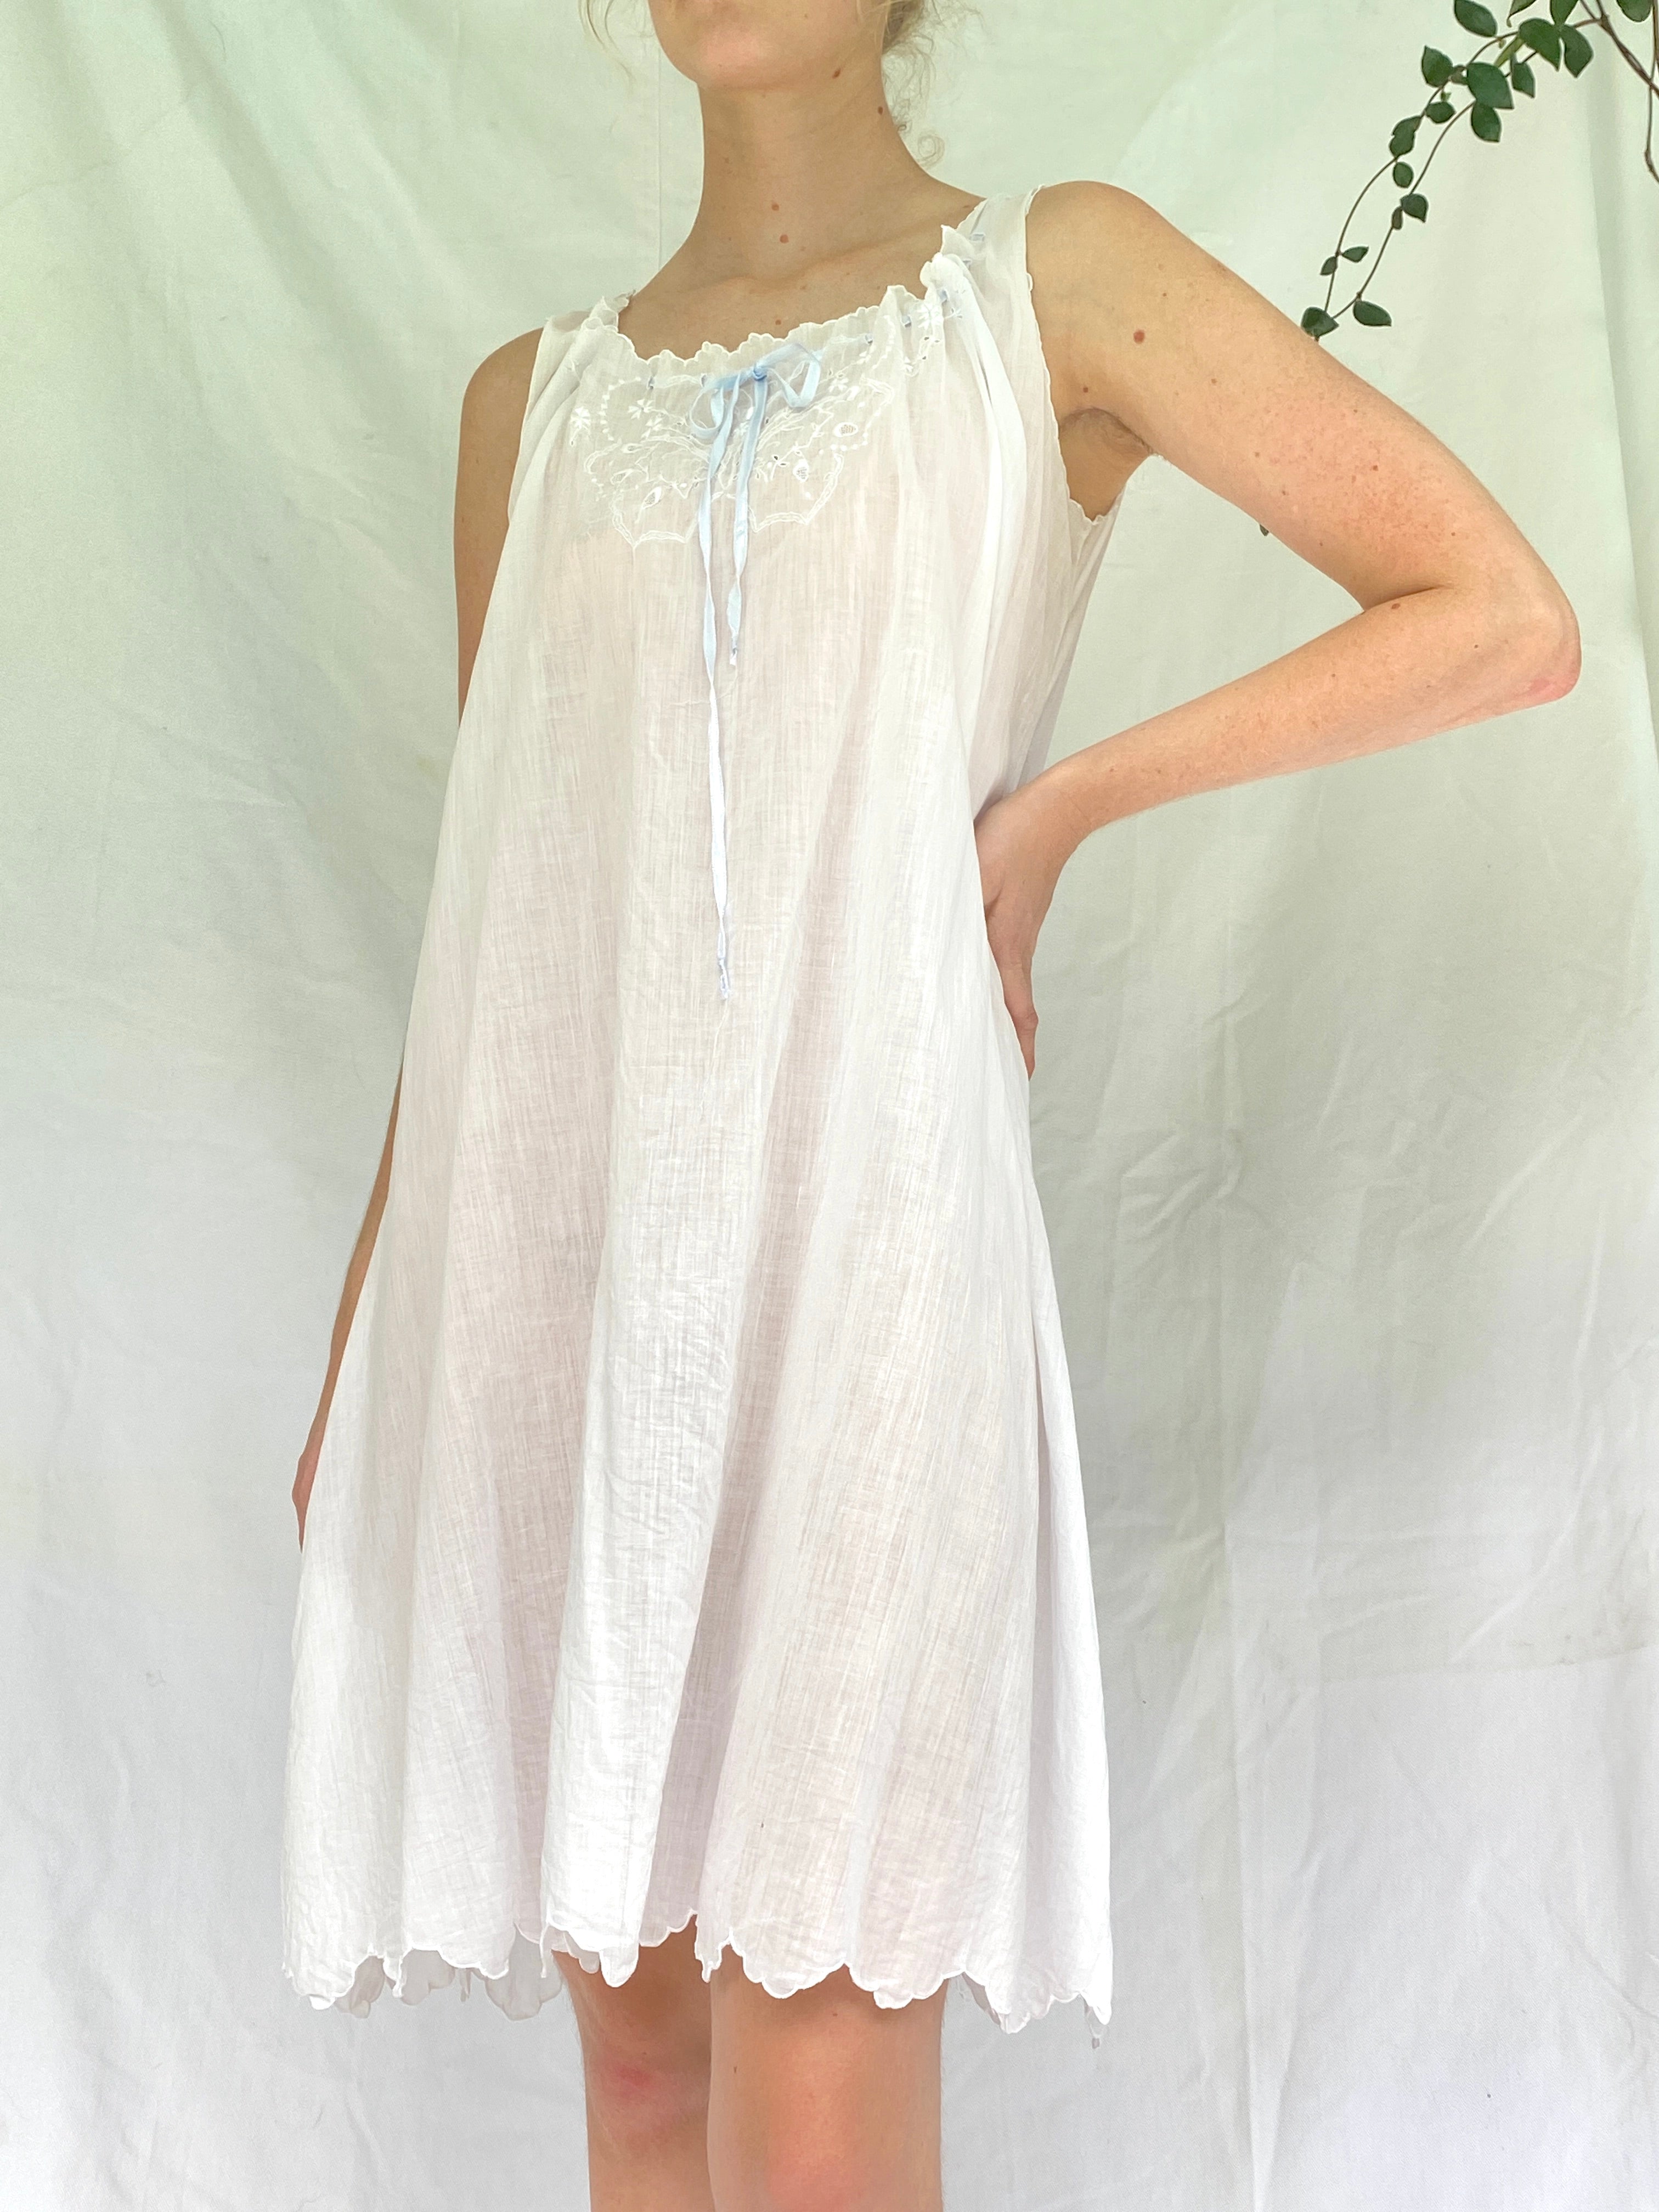 White Cotton Victorian Slip with Baby Blue Ribbon